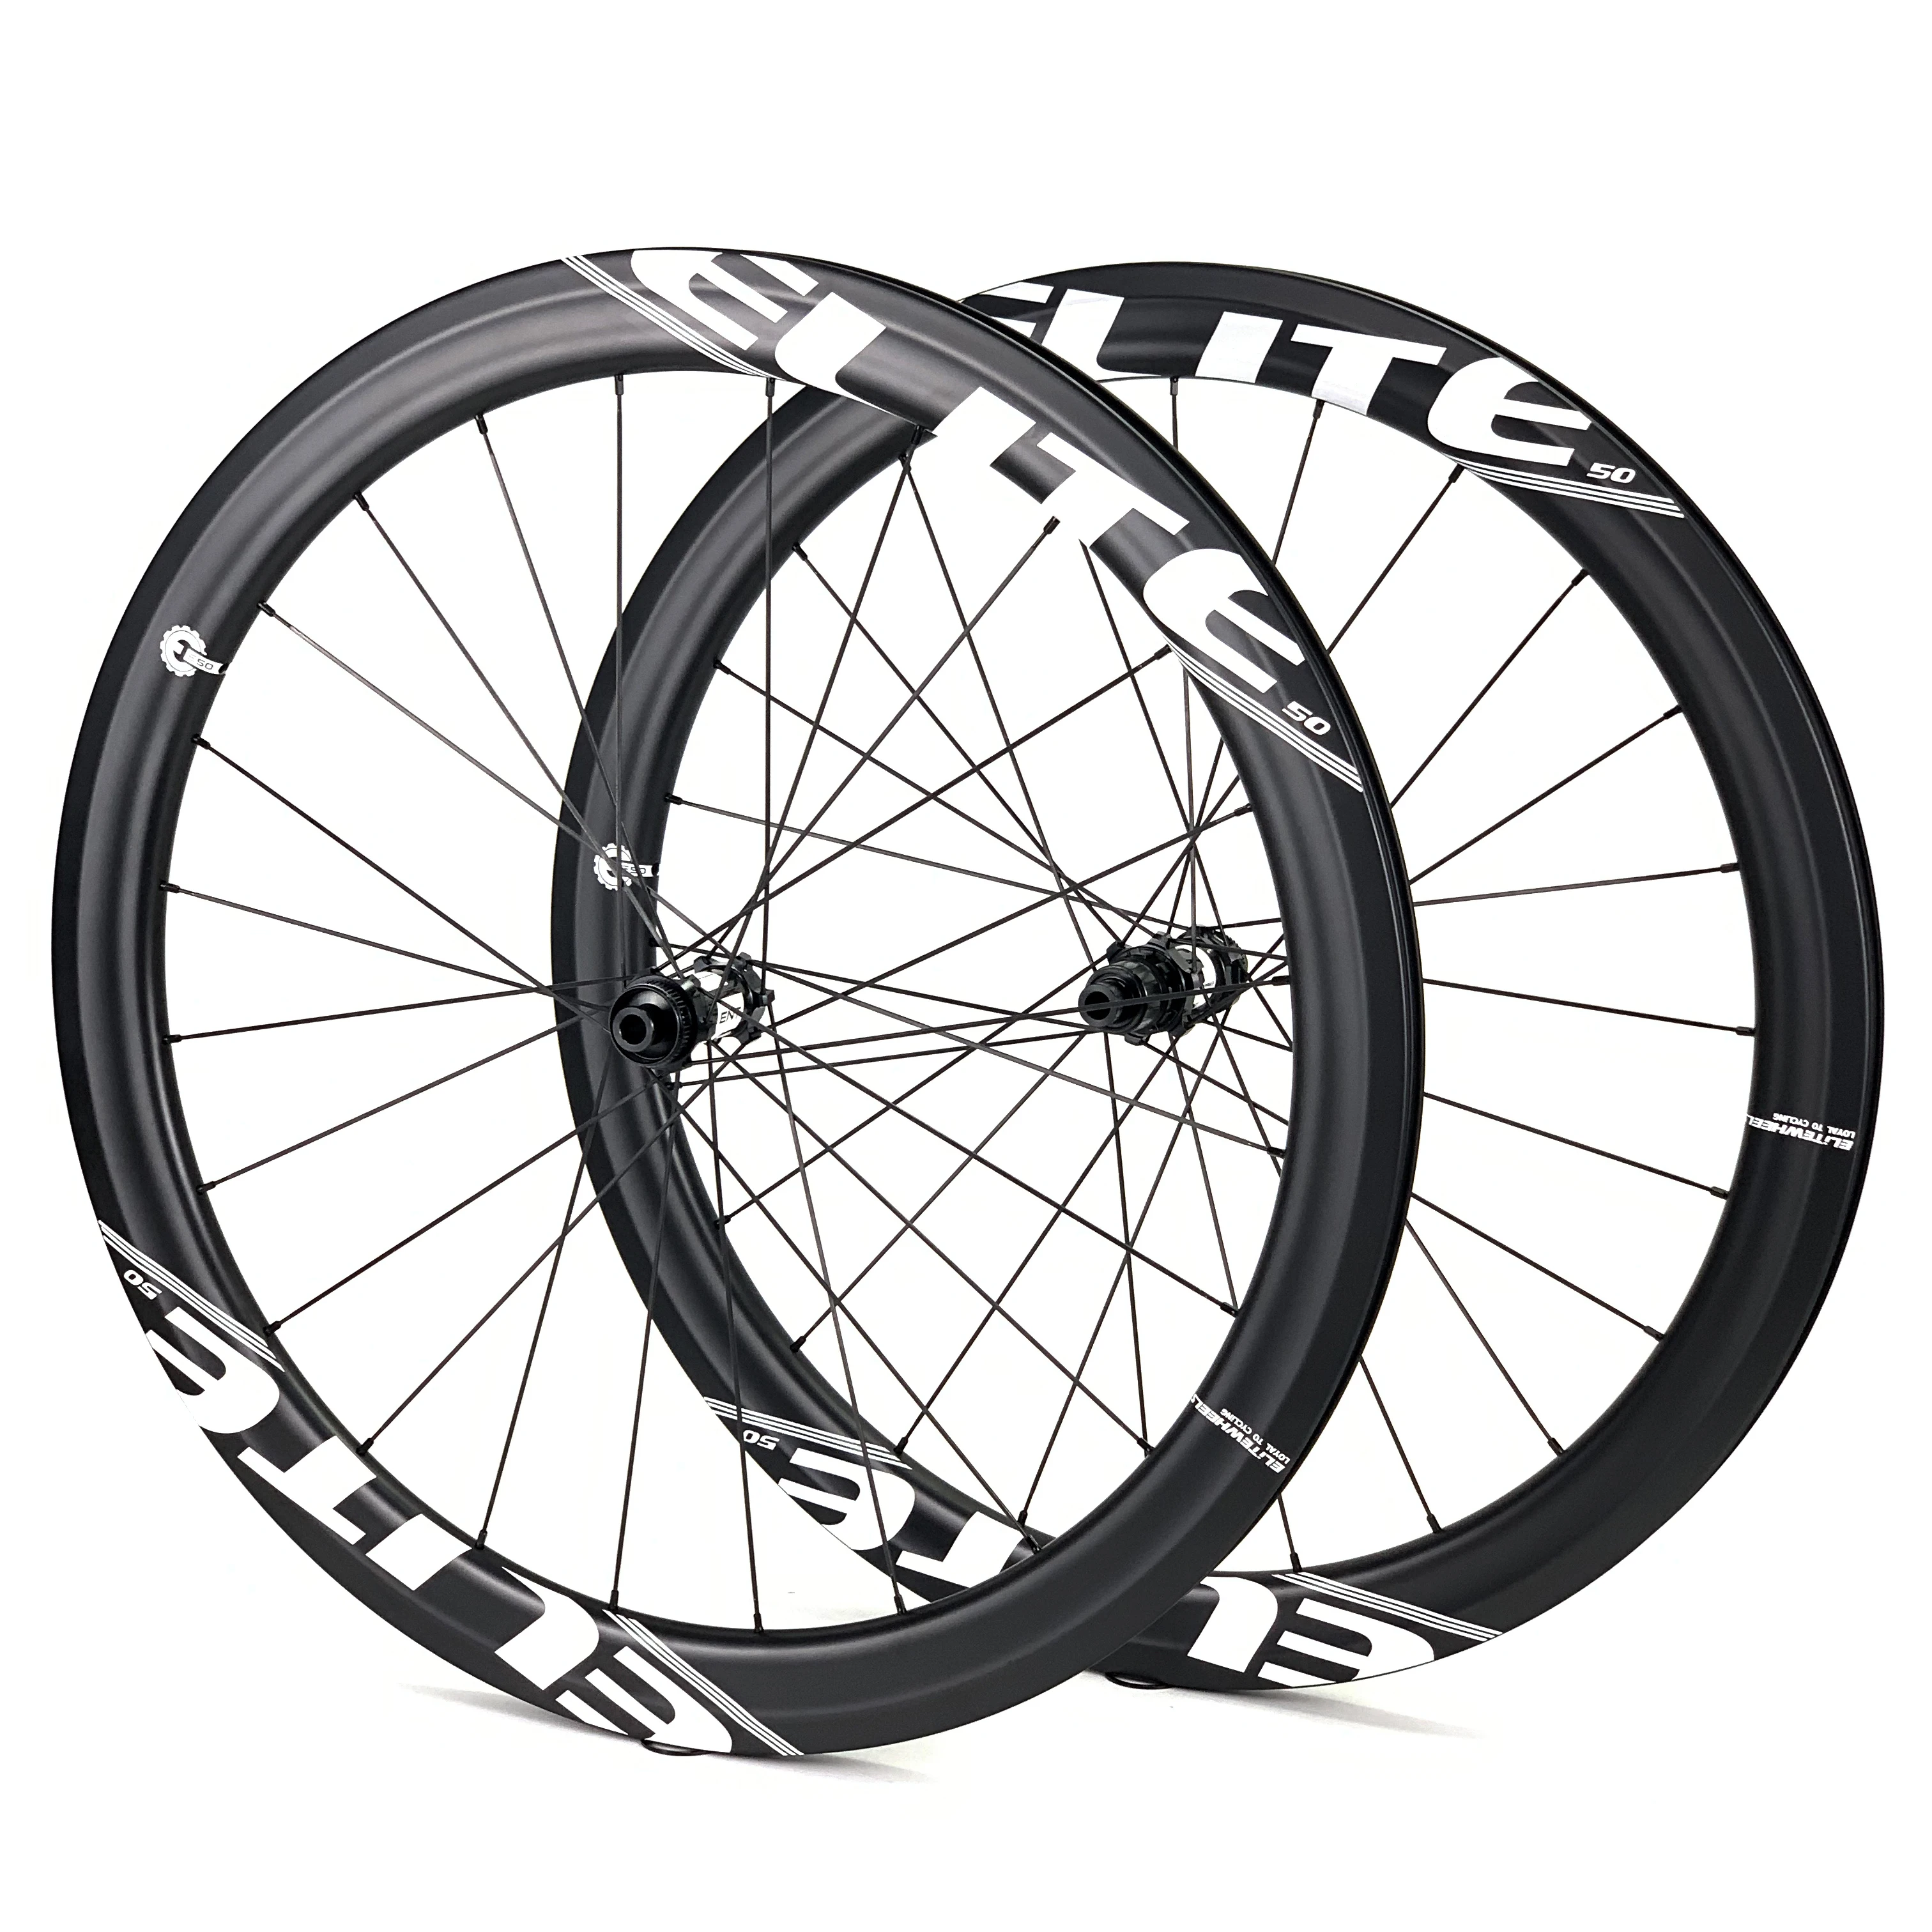 

ELITEWHEELS BWA Carbon Road Disc Wheelset 700c 40mm 50mm Depth Bicycle Rim For Cycling Wheels